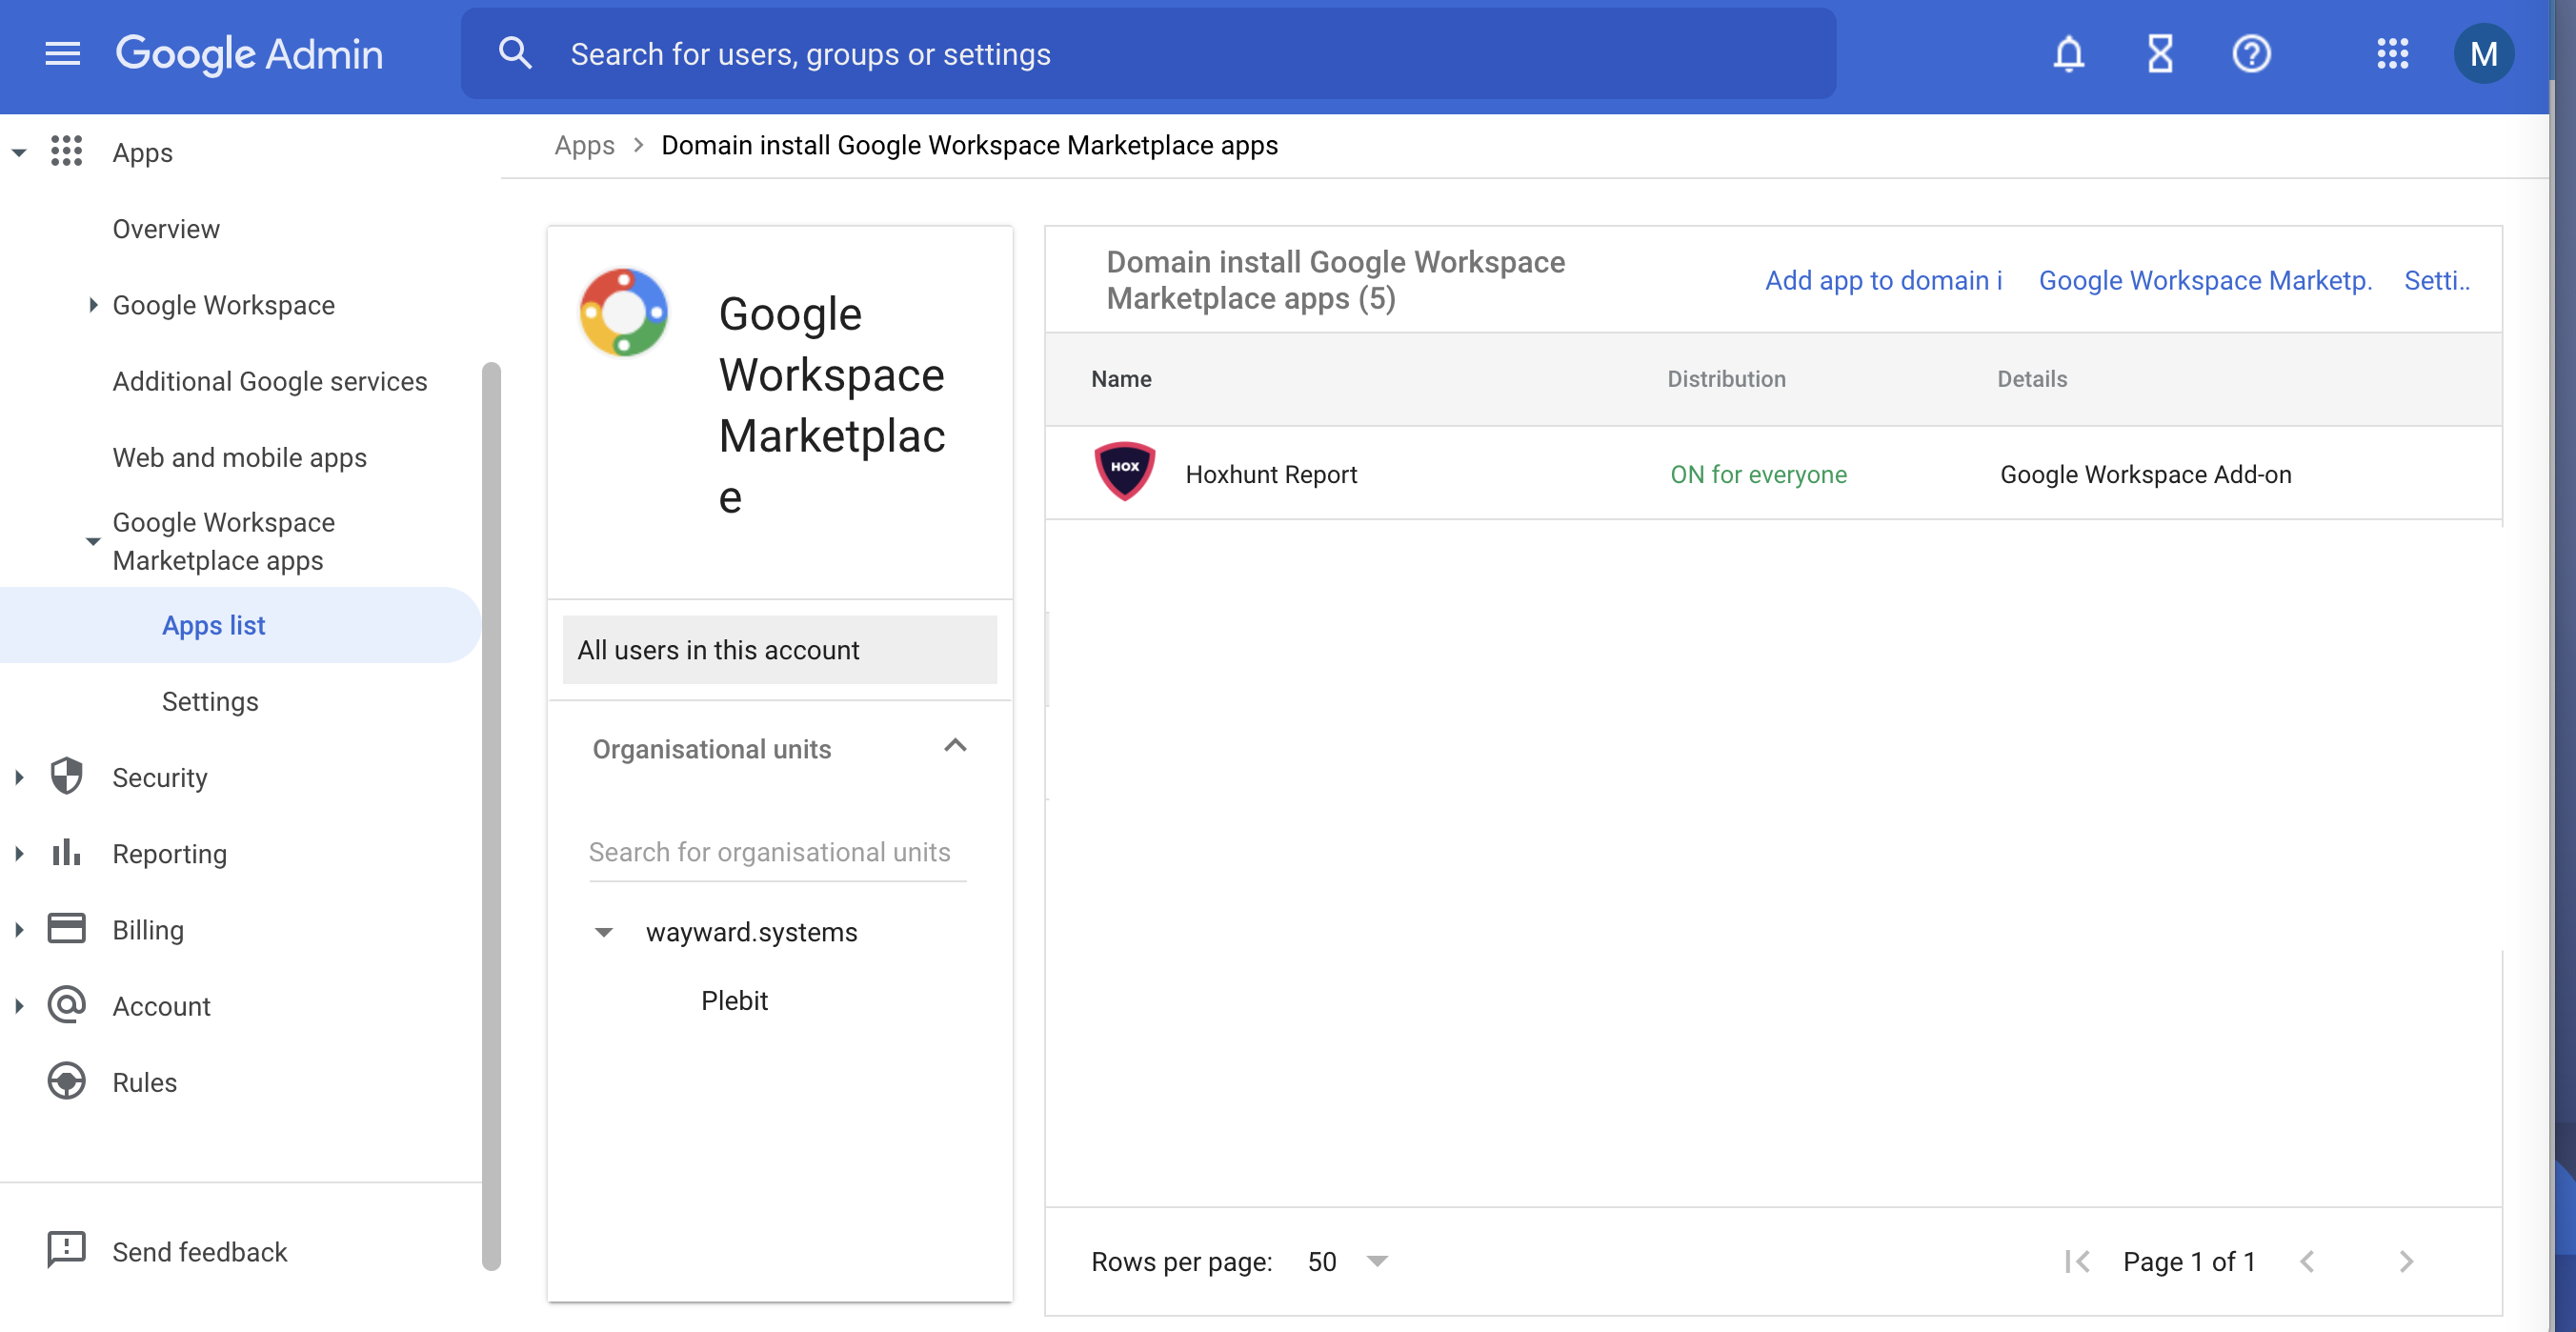 Domain_install_Google_Workspace_Marketplace_apps.png